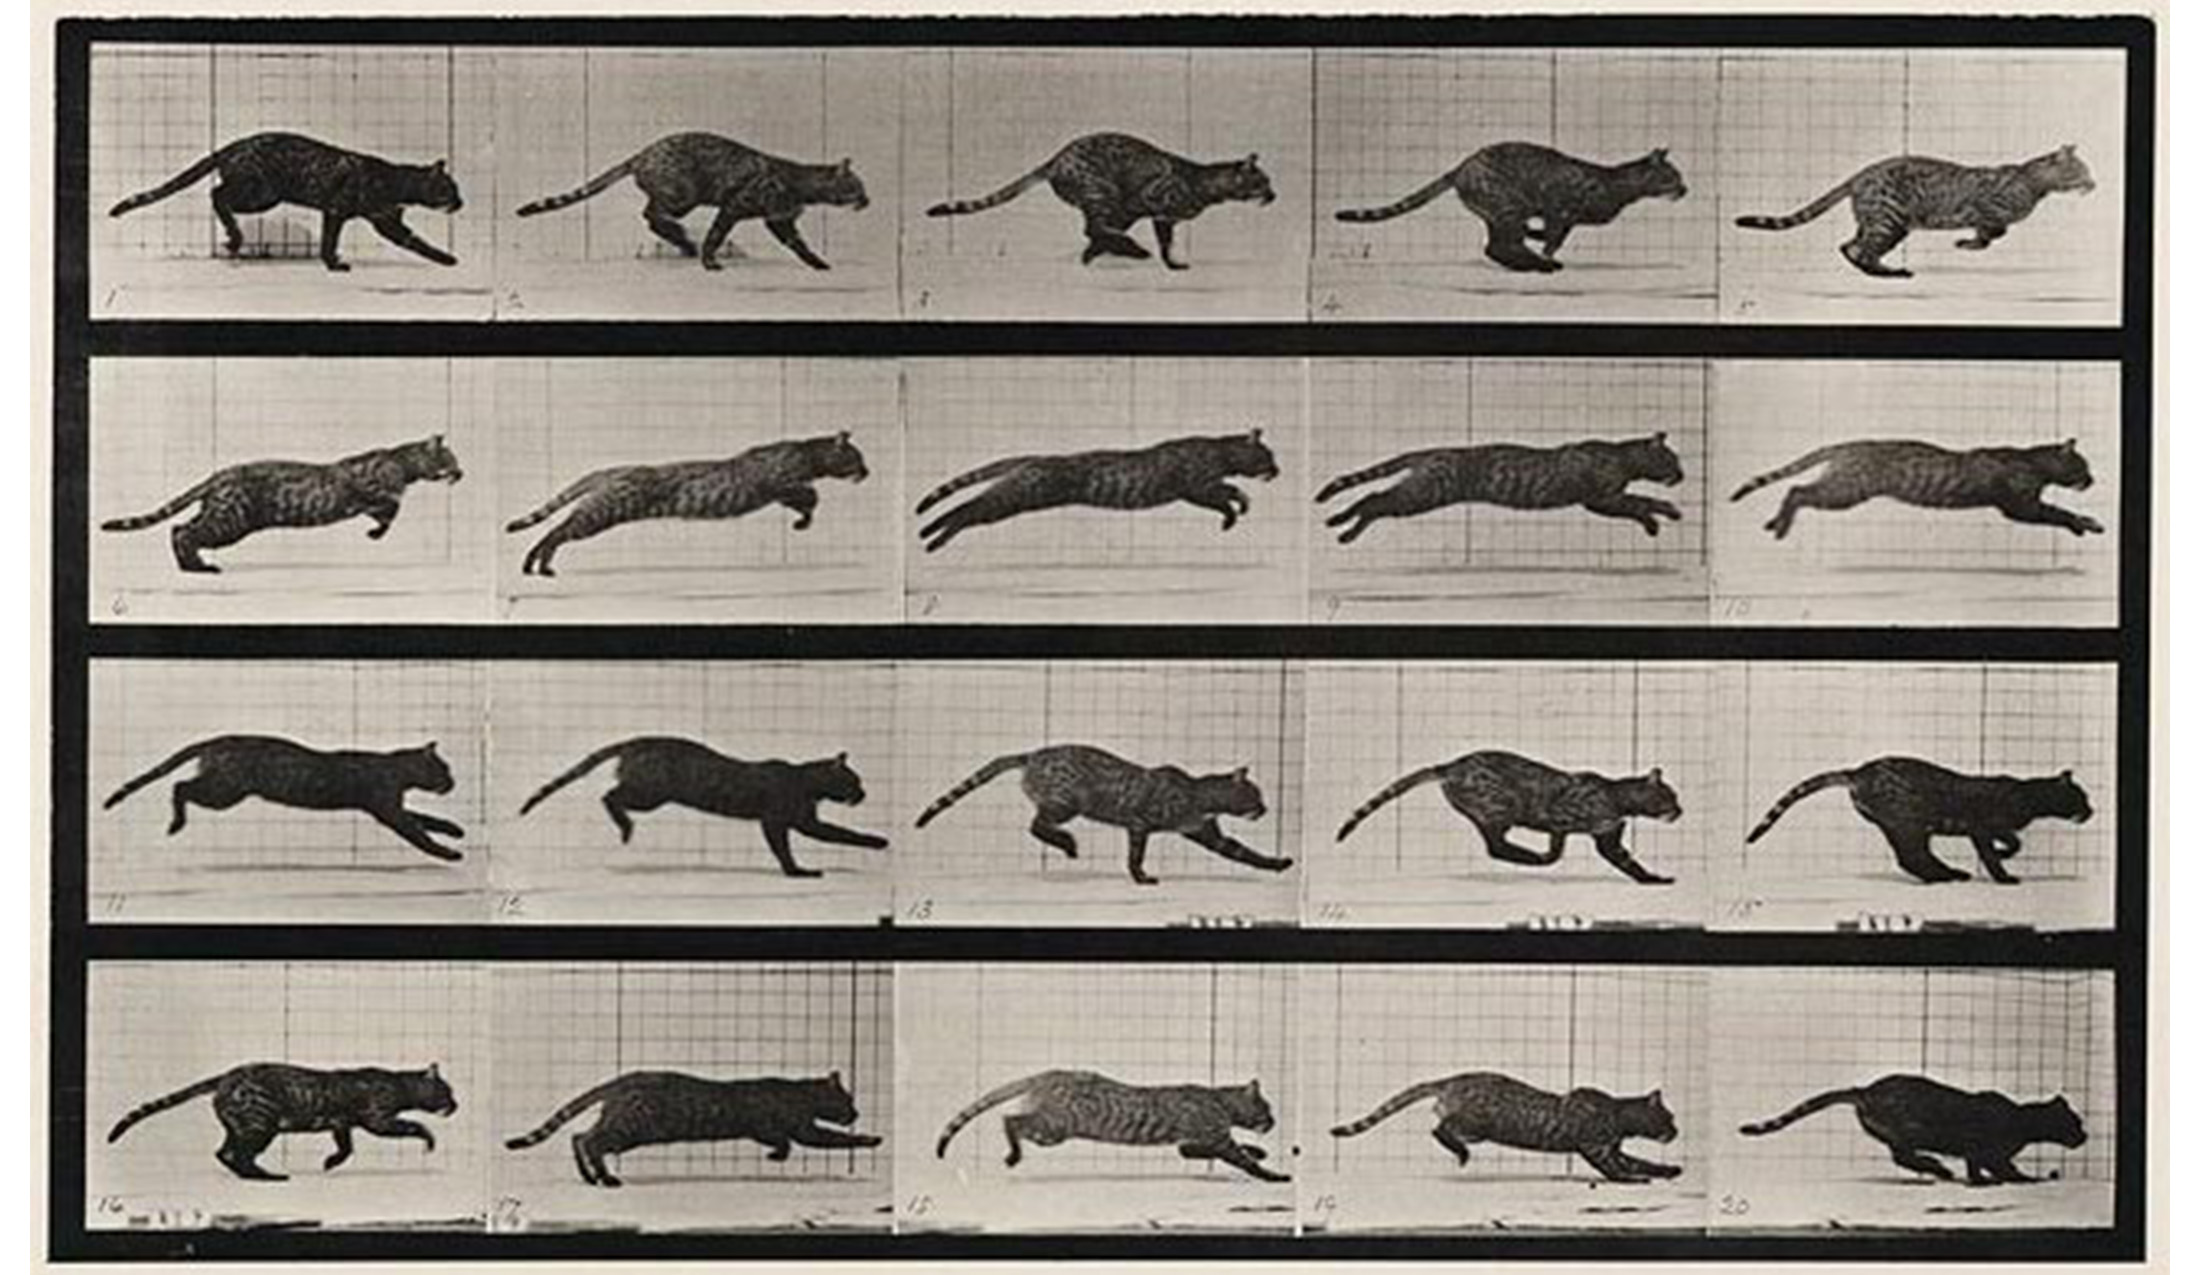 four rows of images of a cat in motion